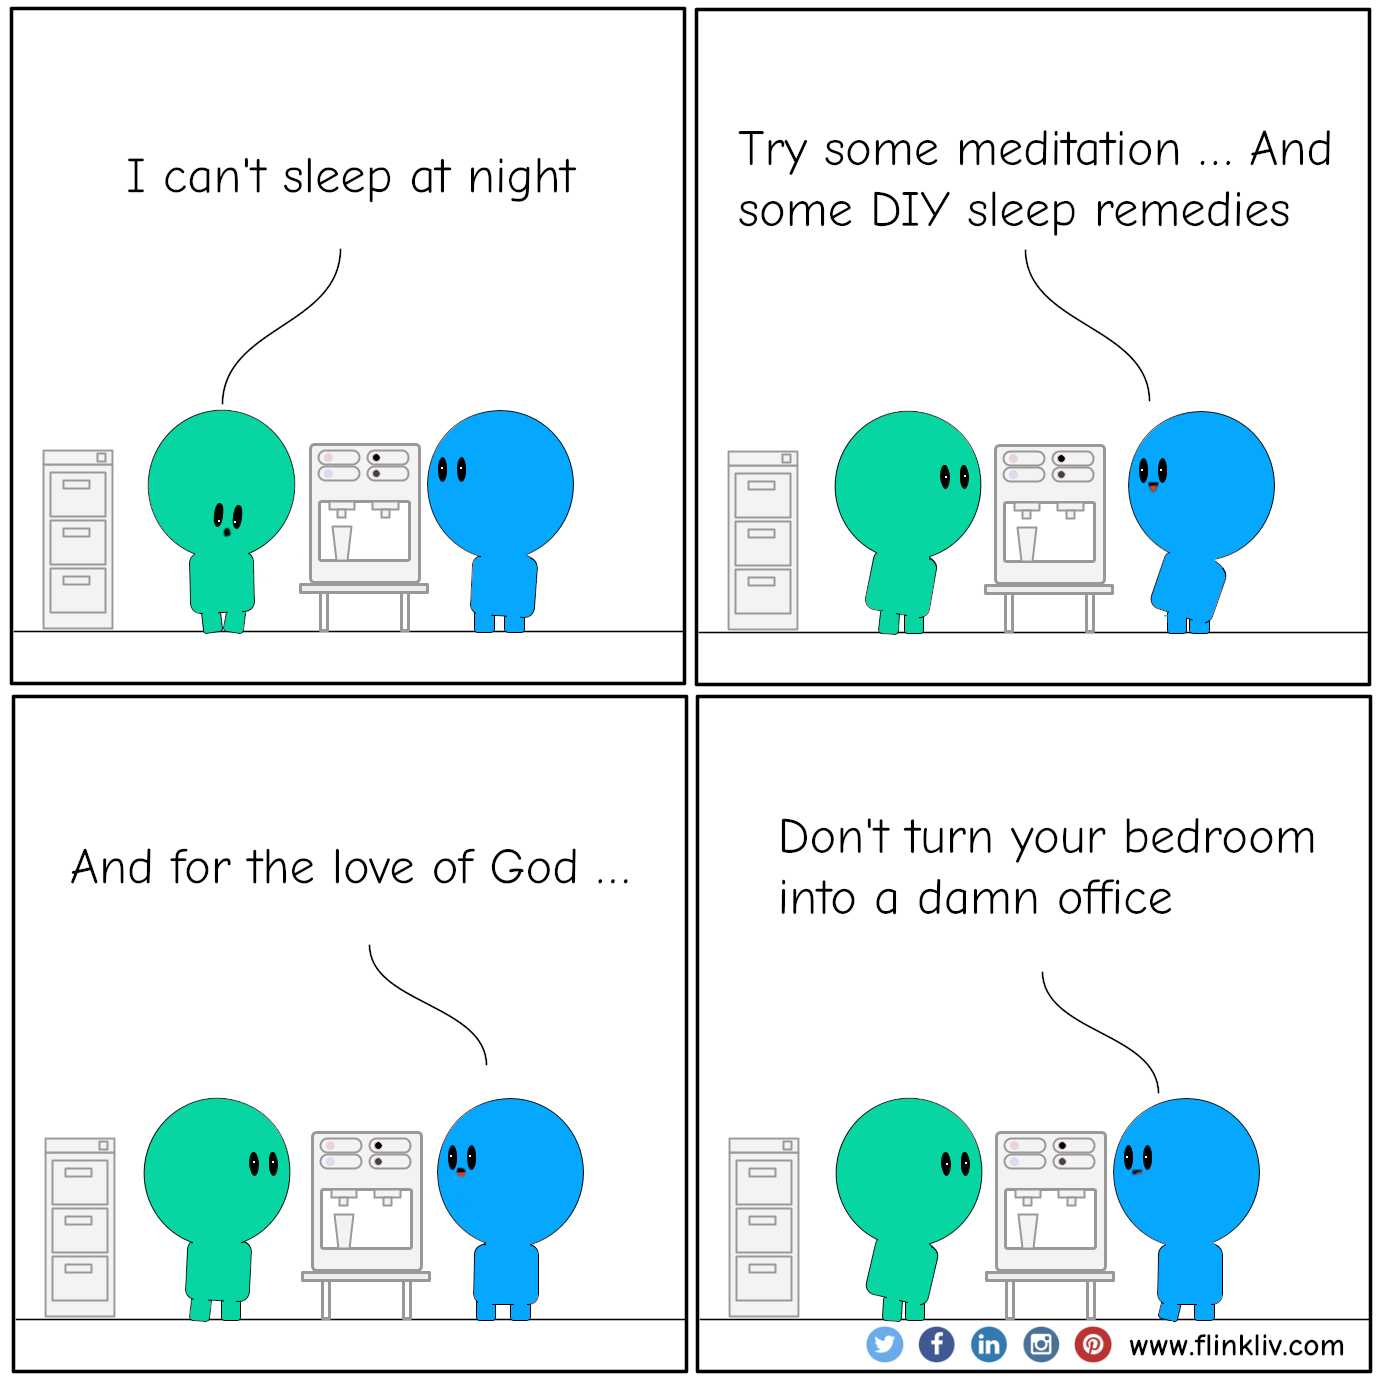 Conversation between A and B to fight insomnia A: I can not sleep at night B: Try some meditation, and some DIY sleep remedies. B: And for the love of God, B: Don't turn your bedroom into a damn office. By flinkliv.com